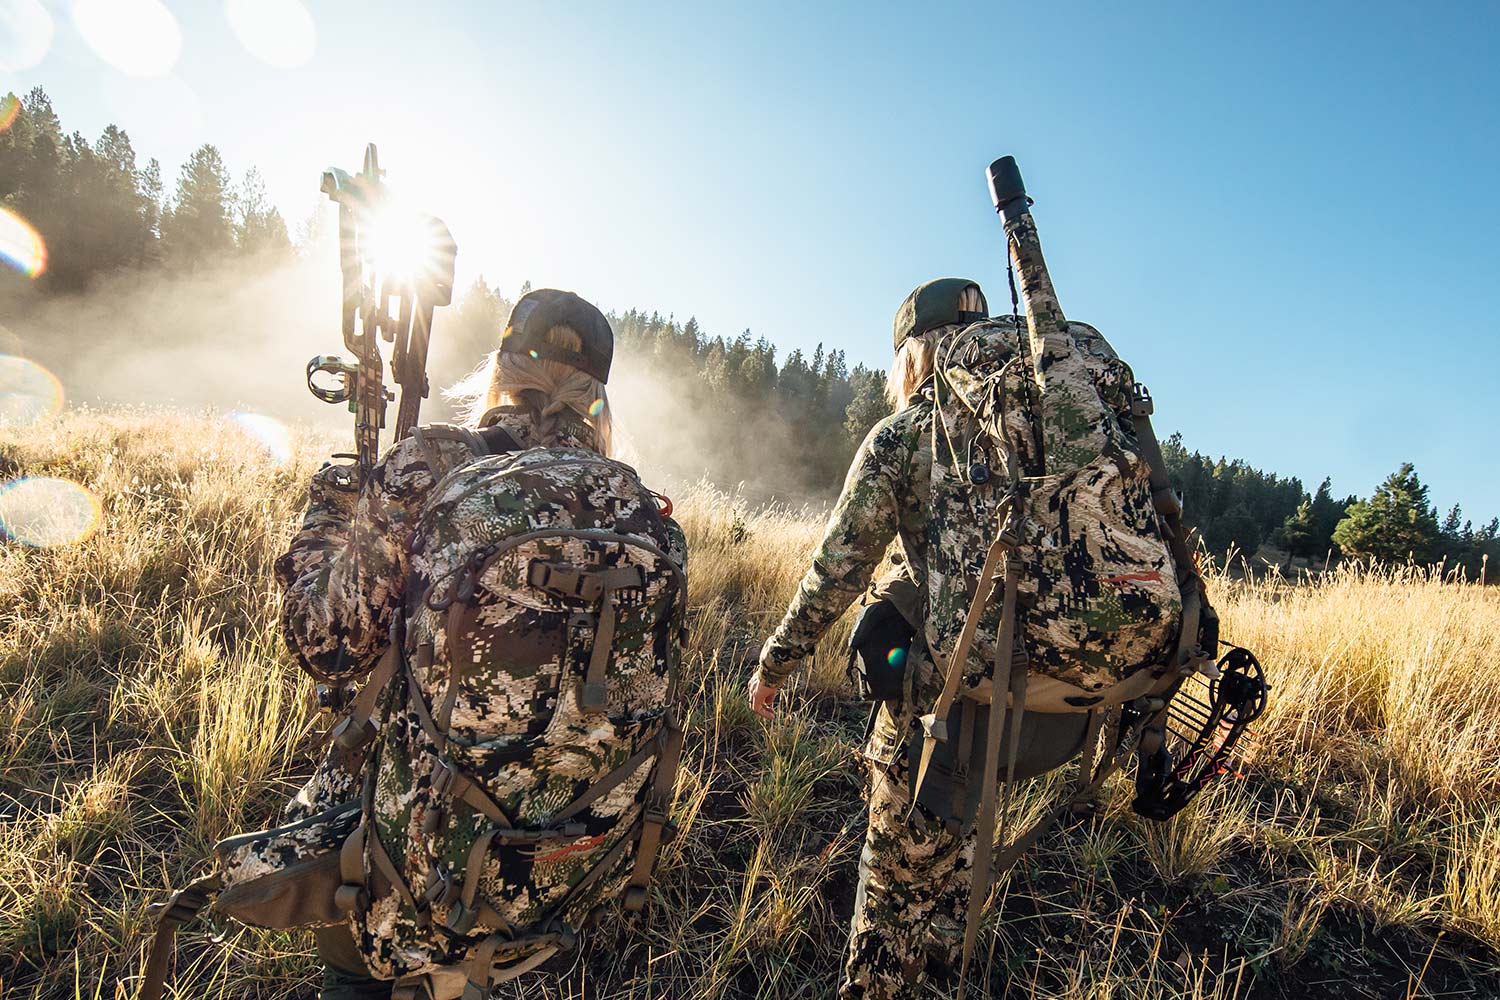 Two hunters scouting through an open field.